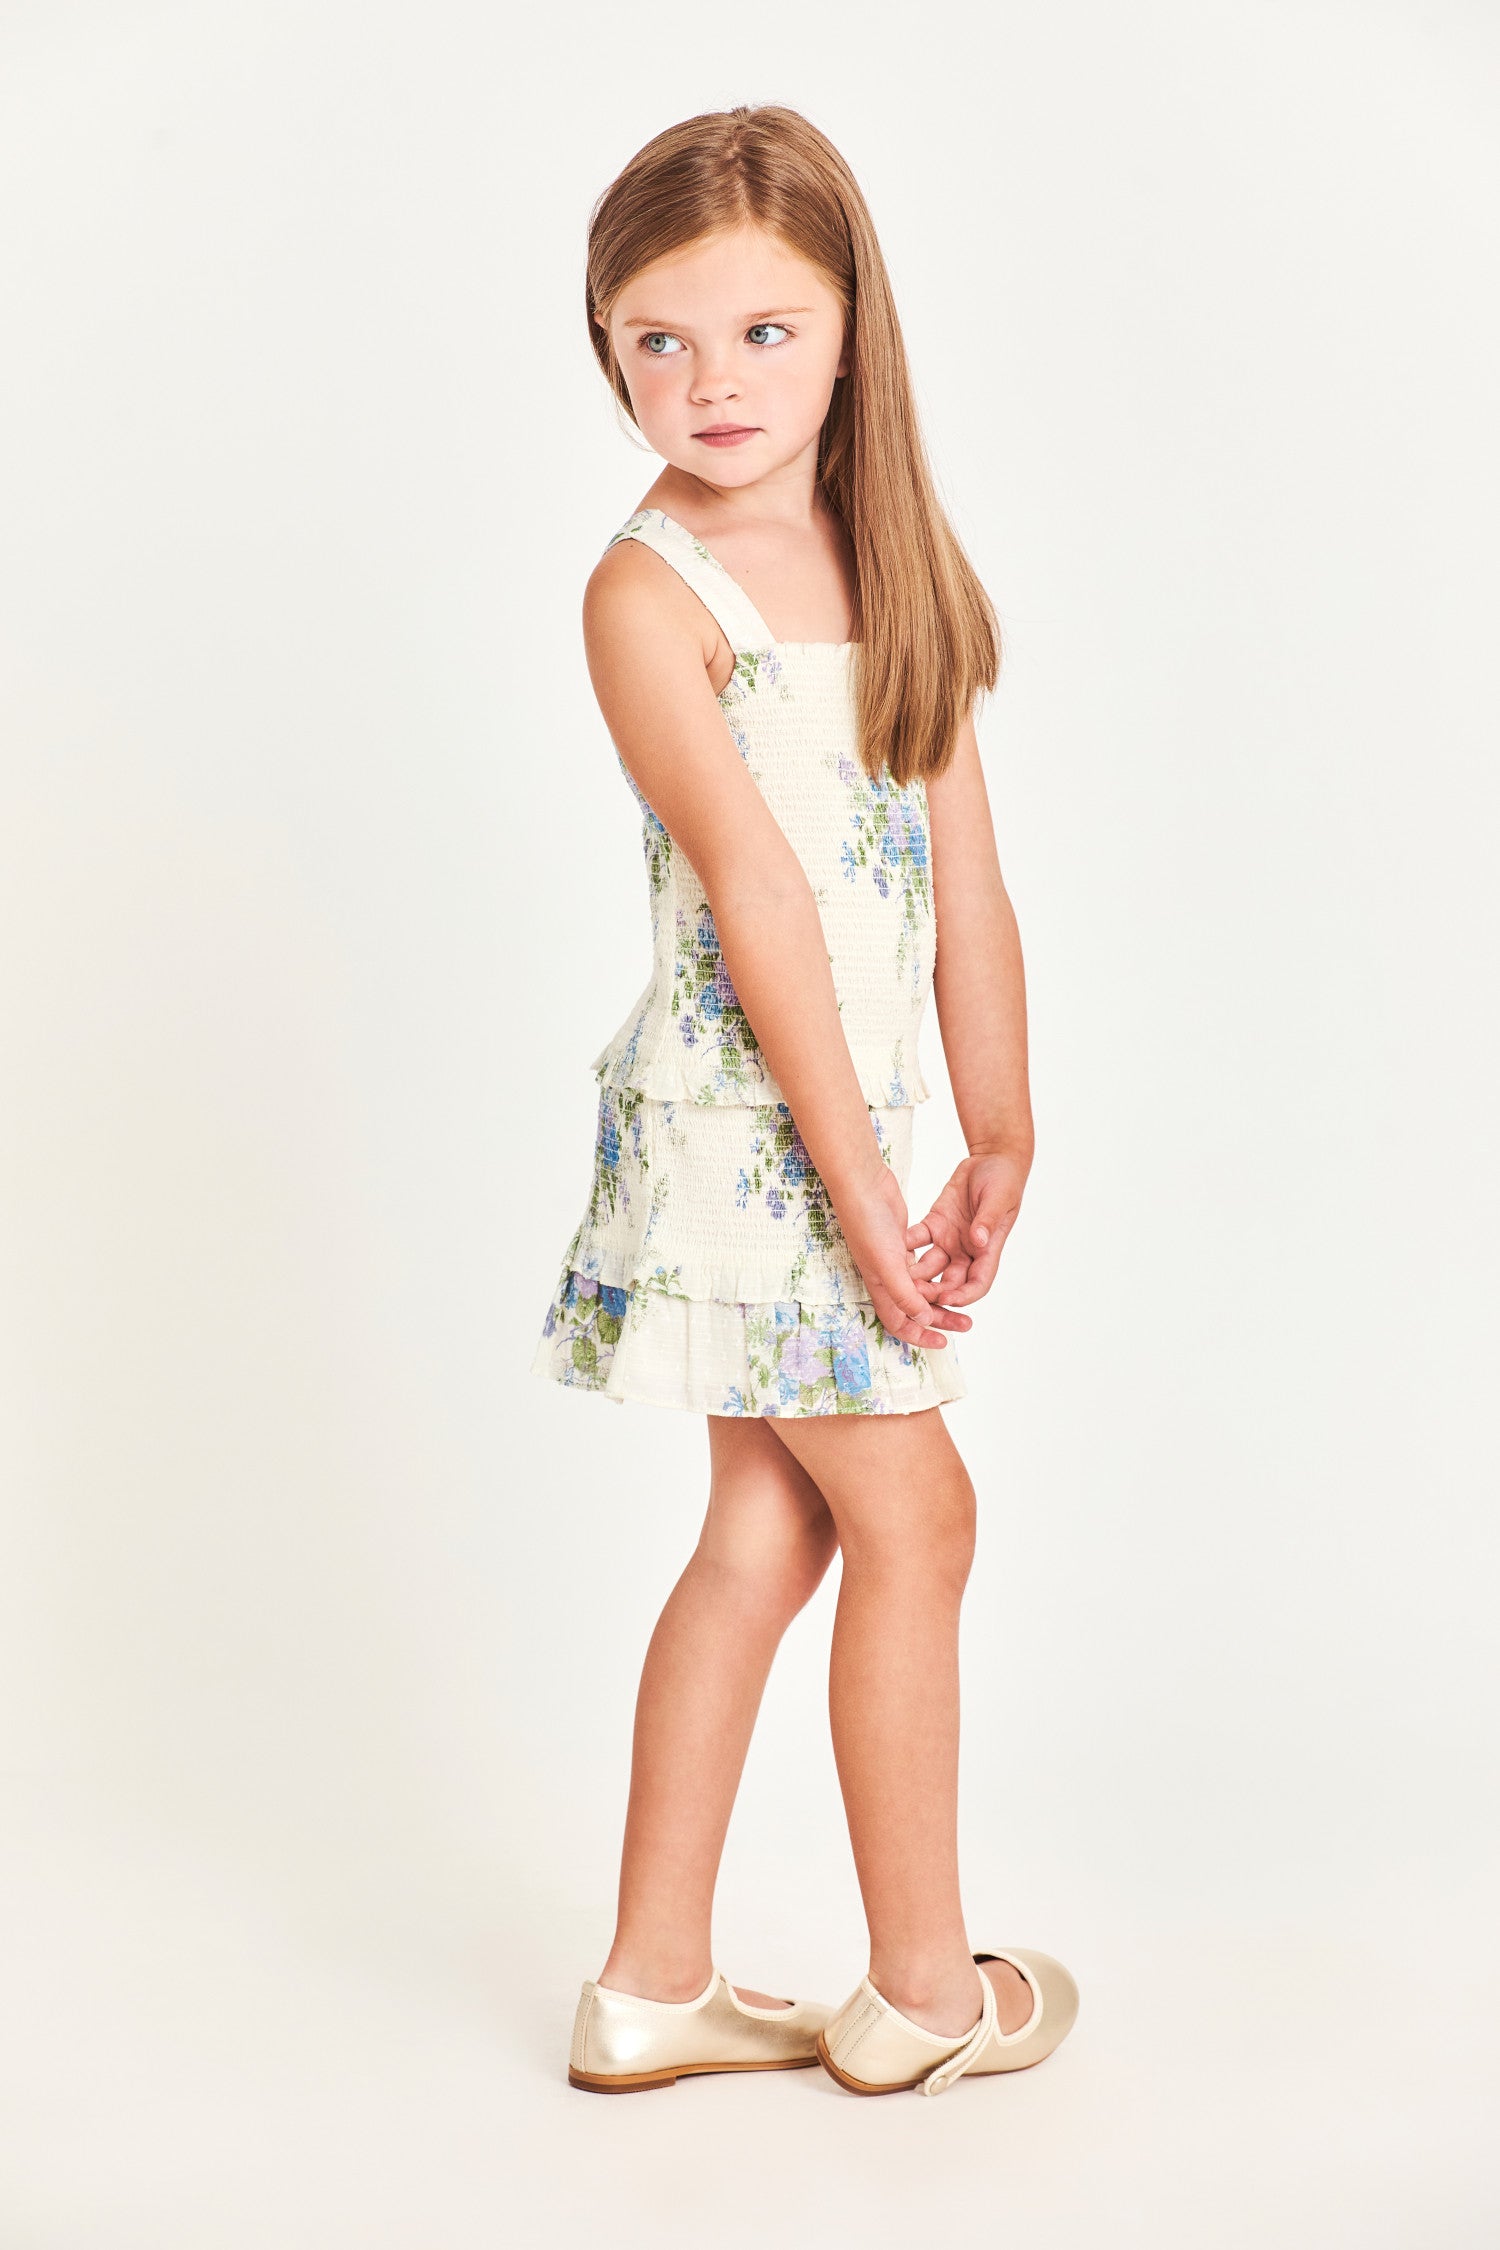 The girl’s Clancey dress is a white 100% cotton dress with blue flower detailing. It features a ruffled two-tier bottom and waistband. 